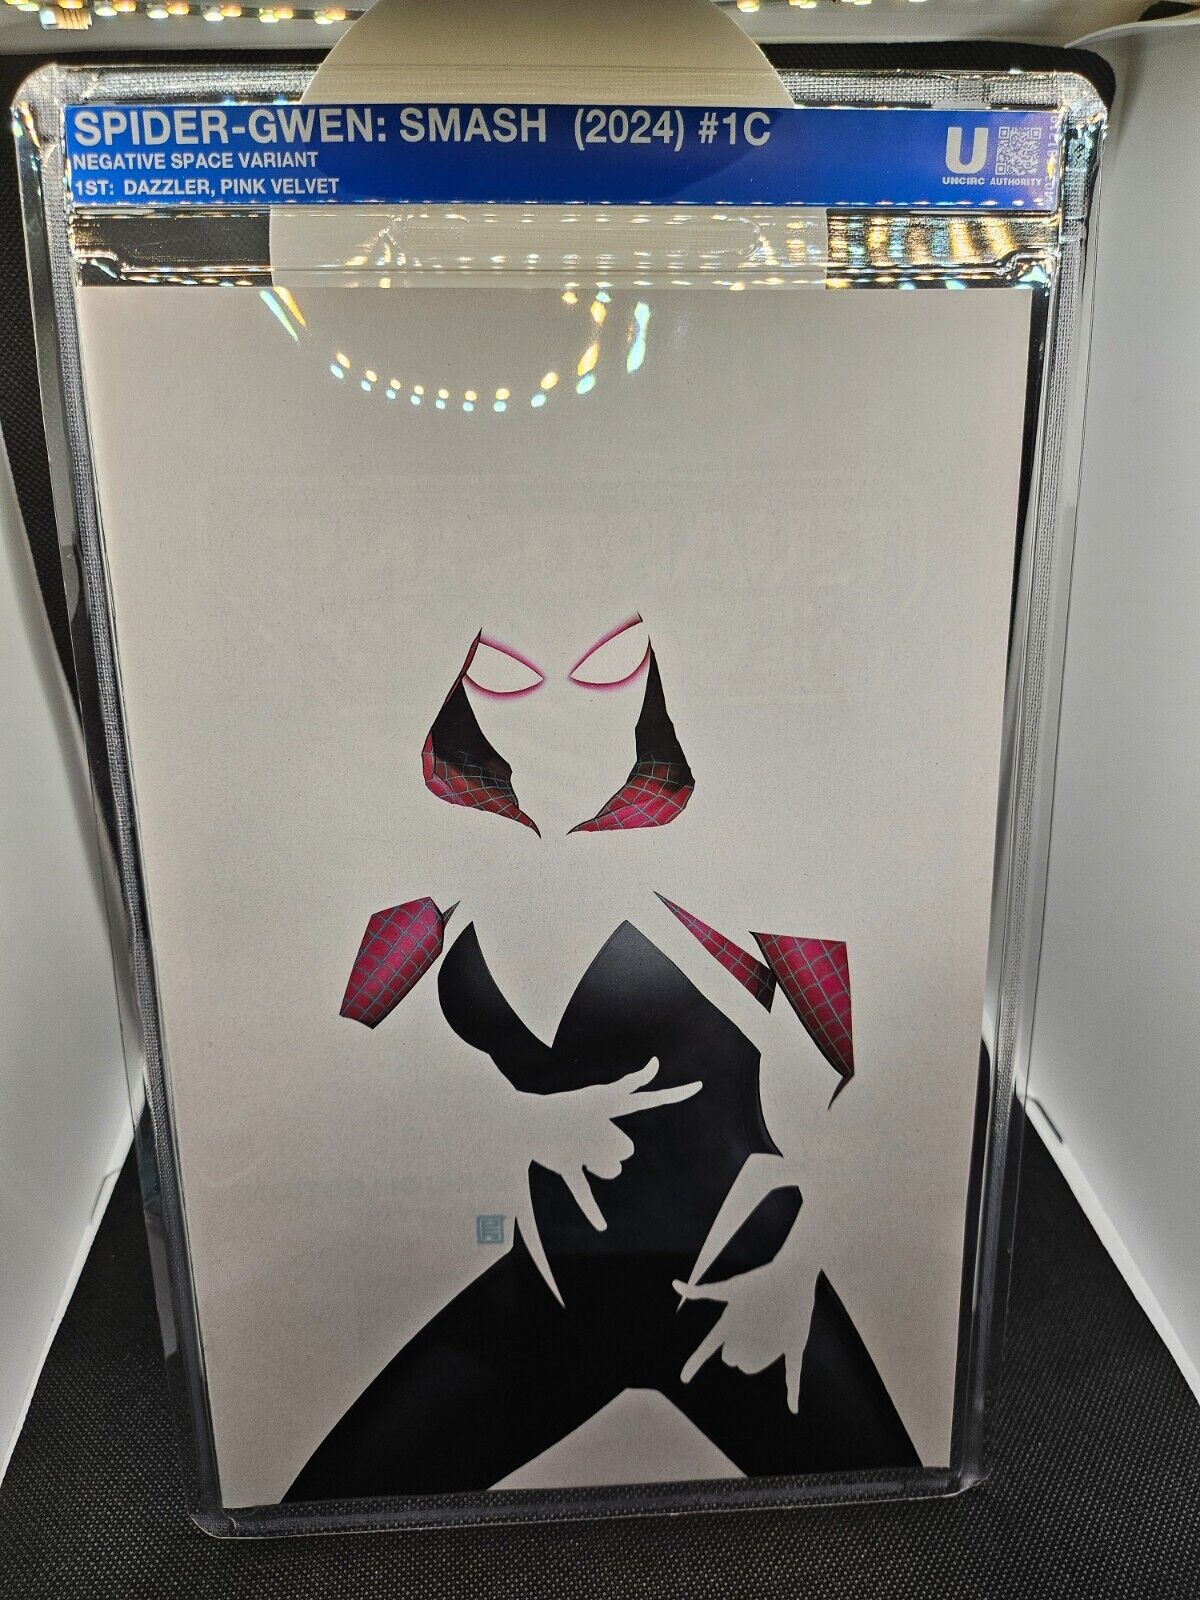 SPIDER-GWEN: SMASH NEGATIVE SPACE VARIANT UNCIRCULATED RARE #1C